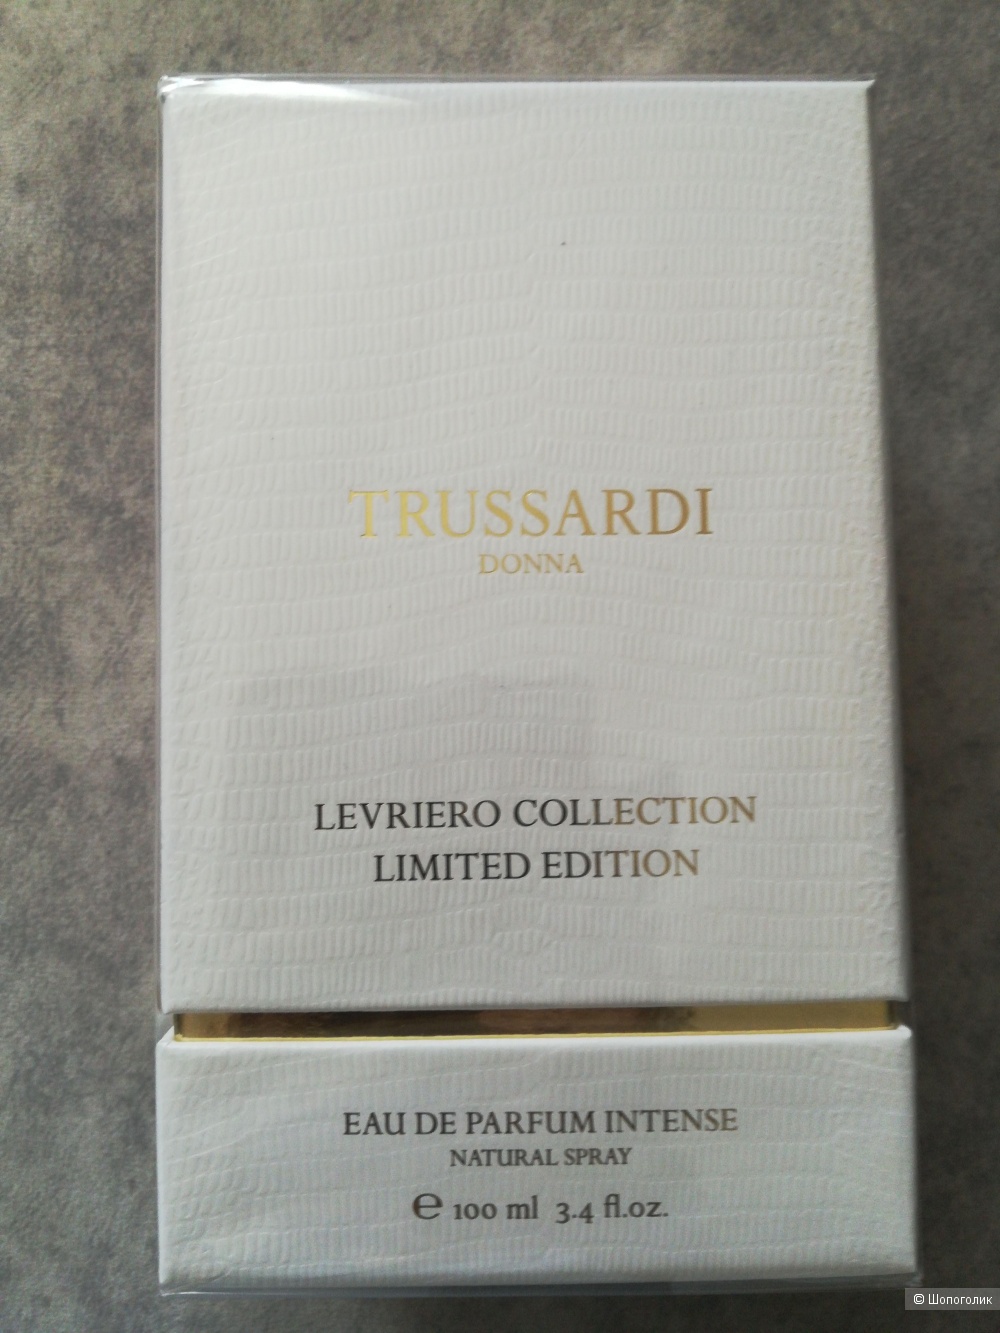 Trussardi edp Donna levriero collection limited edition 100 мл